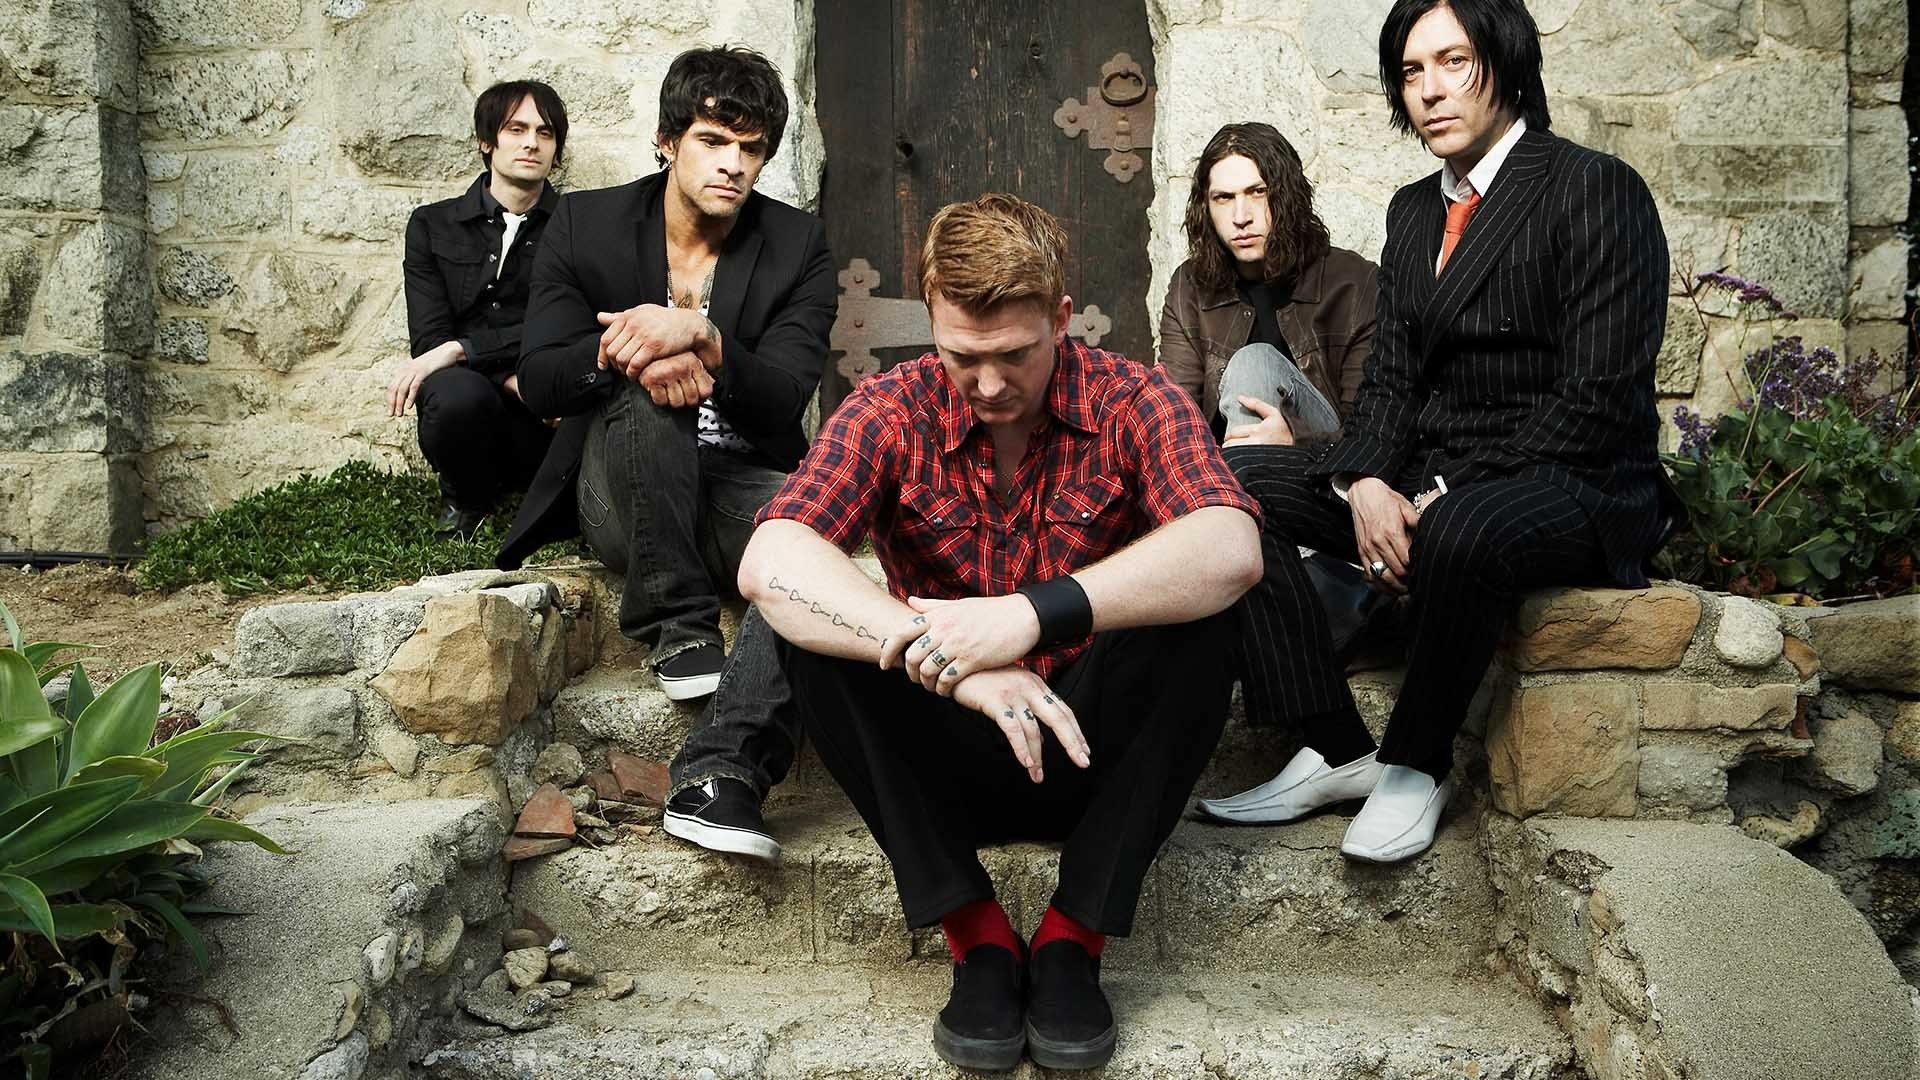 1920x1080 Get the latest queens of the stone age, band, clothes news, pictures and  videos and learn all about queens of the stone age, band, clothes from ...